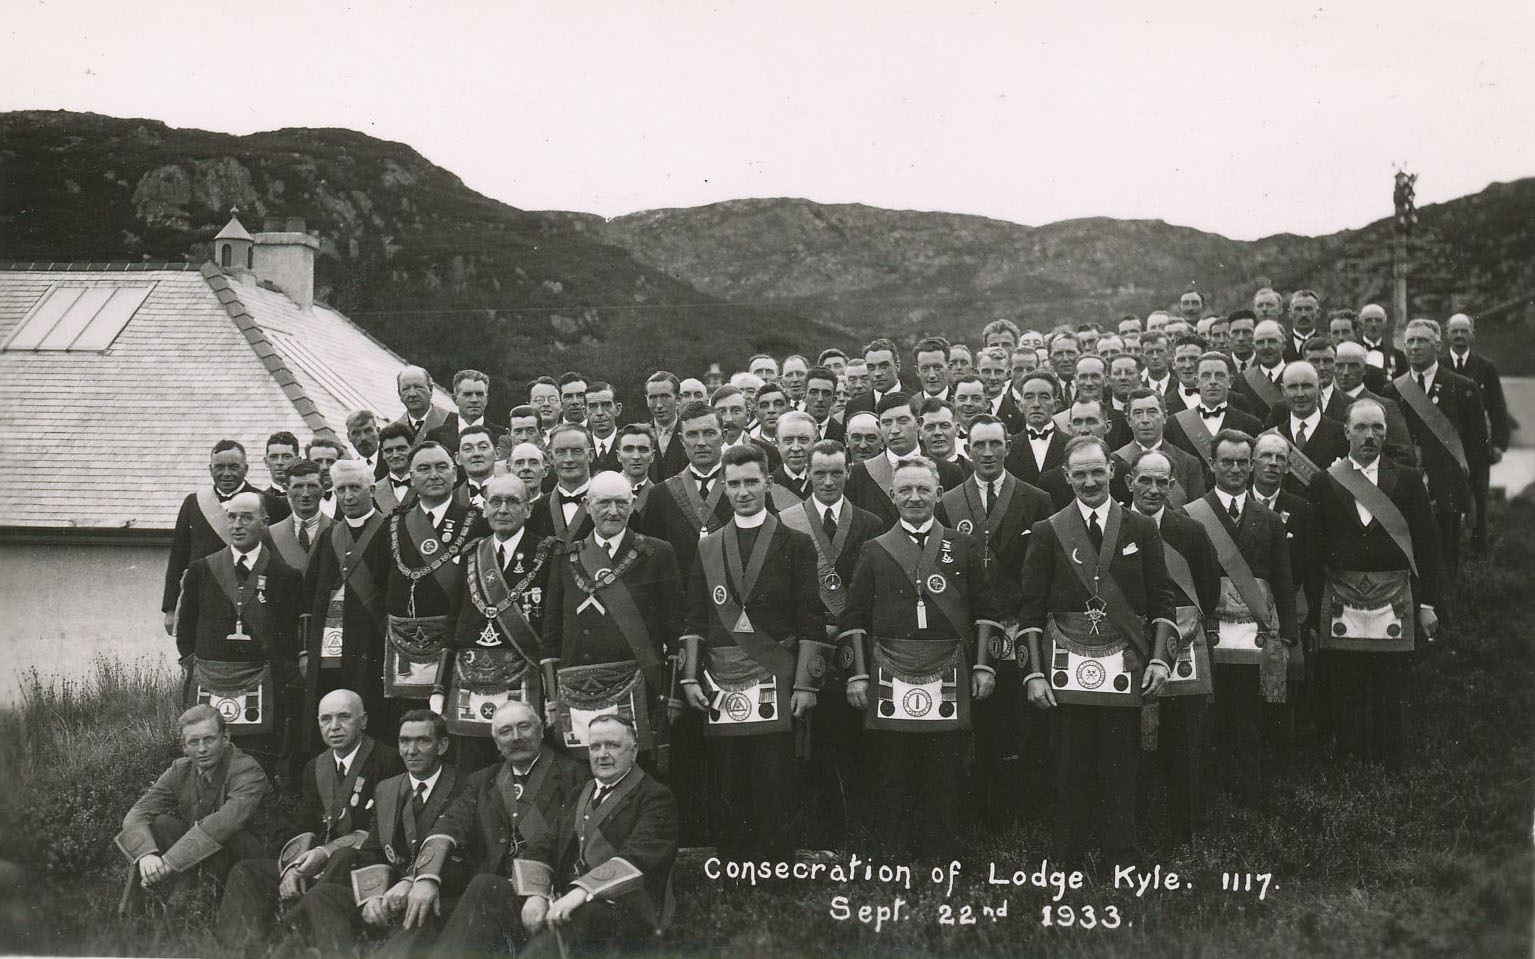 Consecration of Lodge Kyle 117, September 22, 1933.